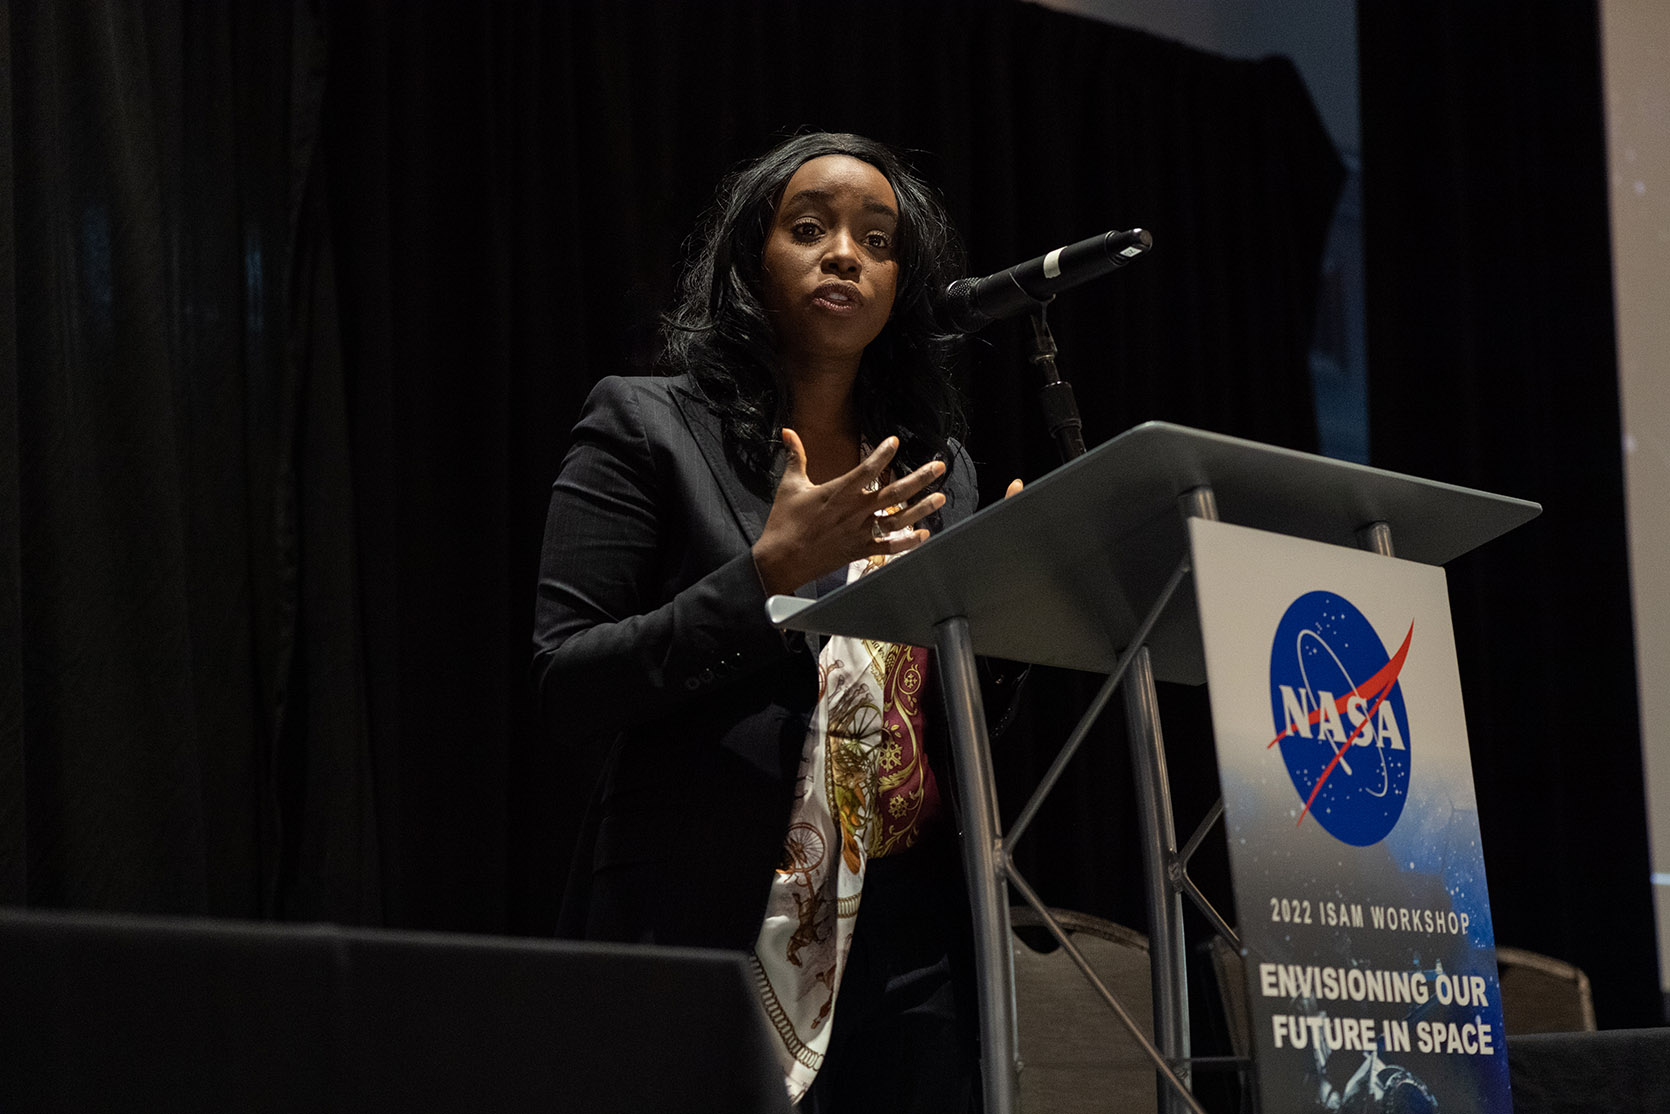 Dr. Ezinne Uzo-Okoro, assistant director for space policy, White House Office of Science and Technology Policy (OSTP), presents at the workshop